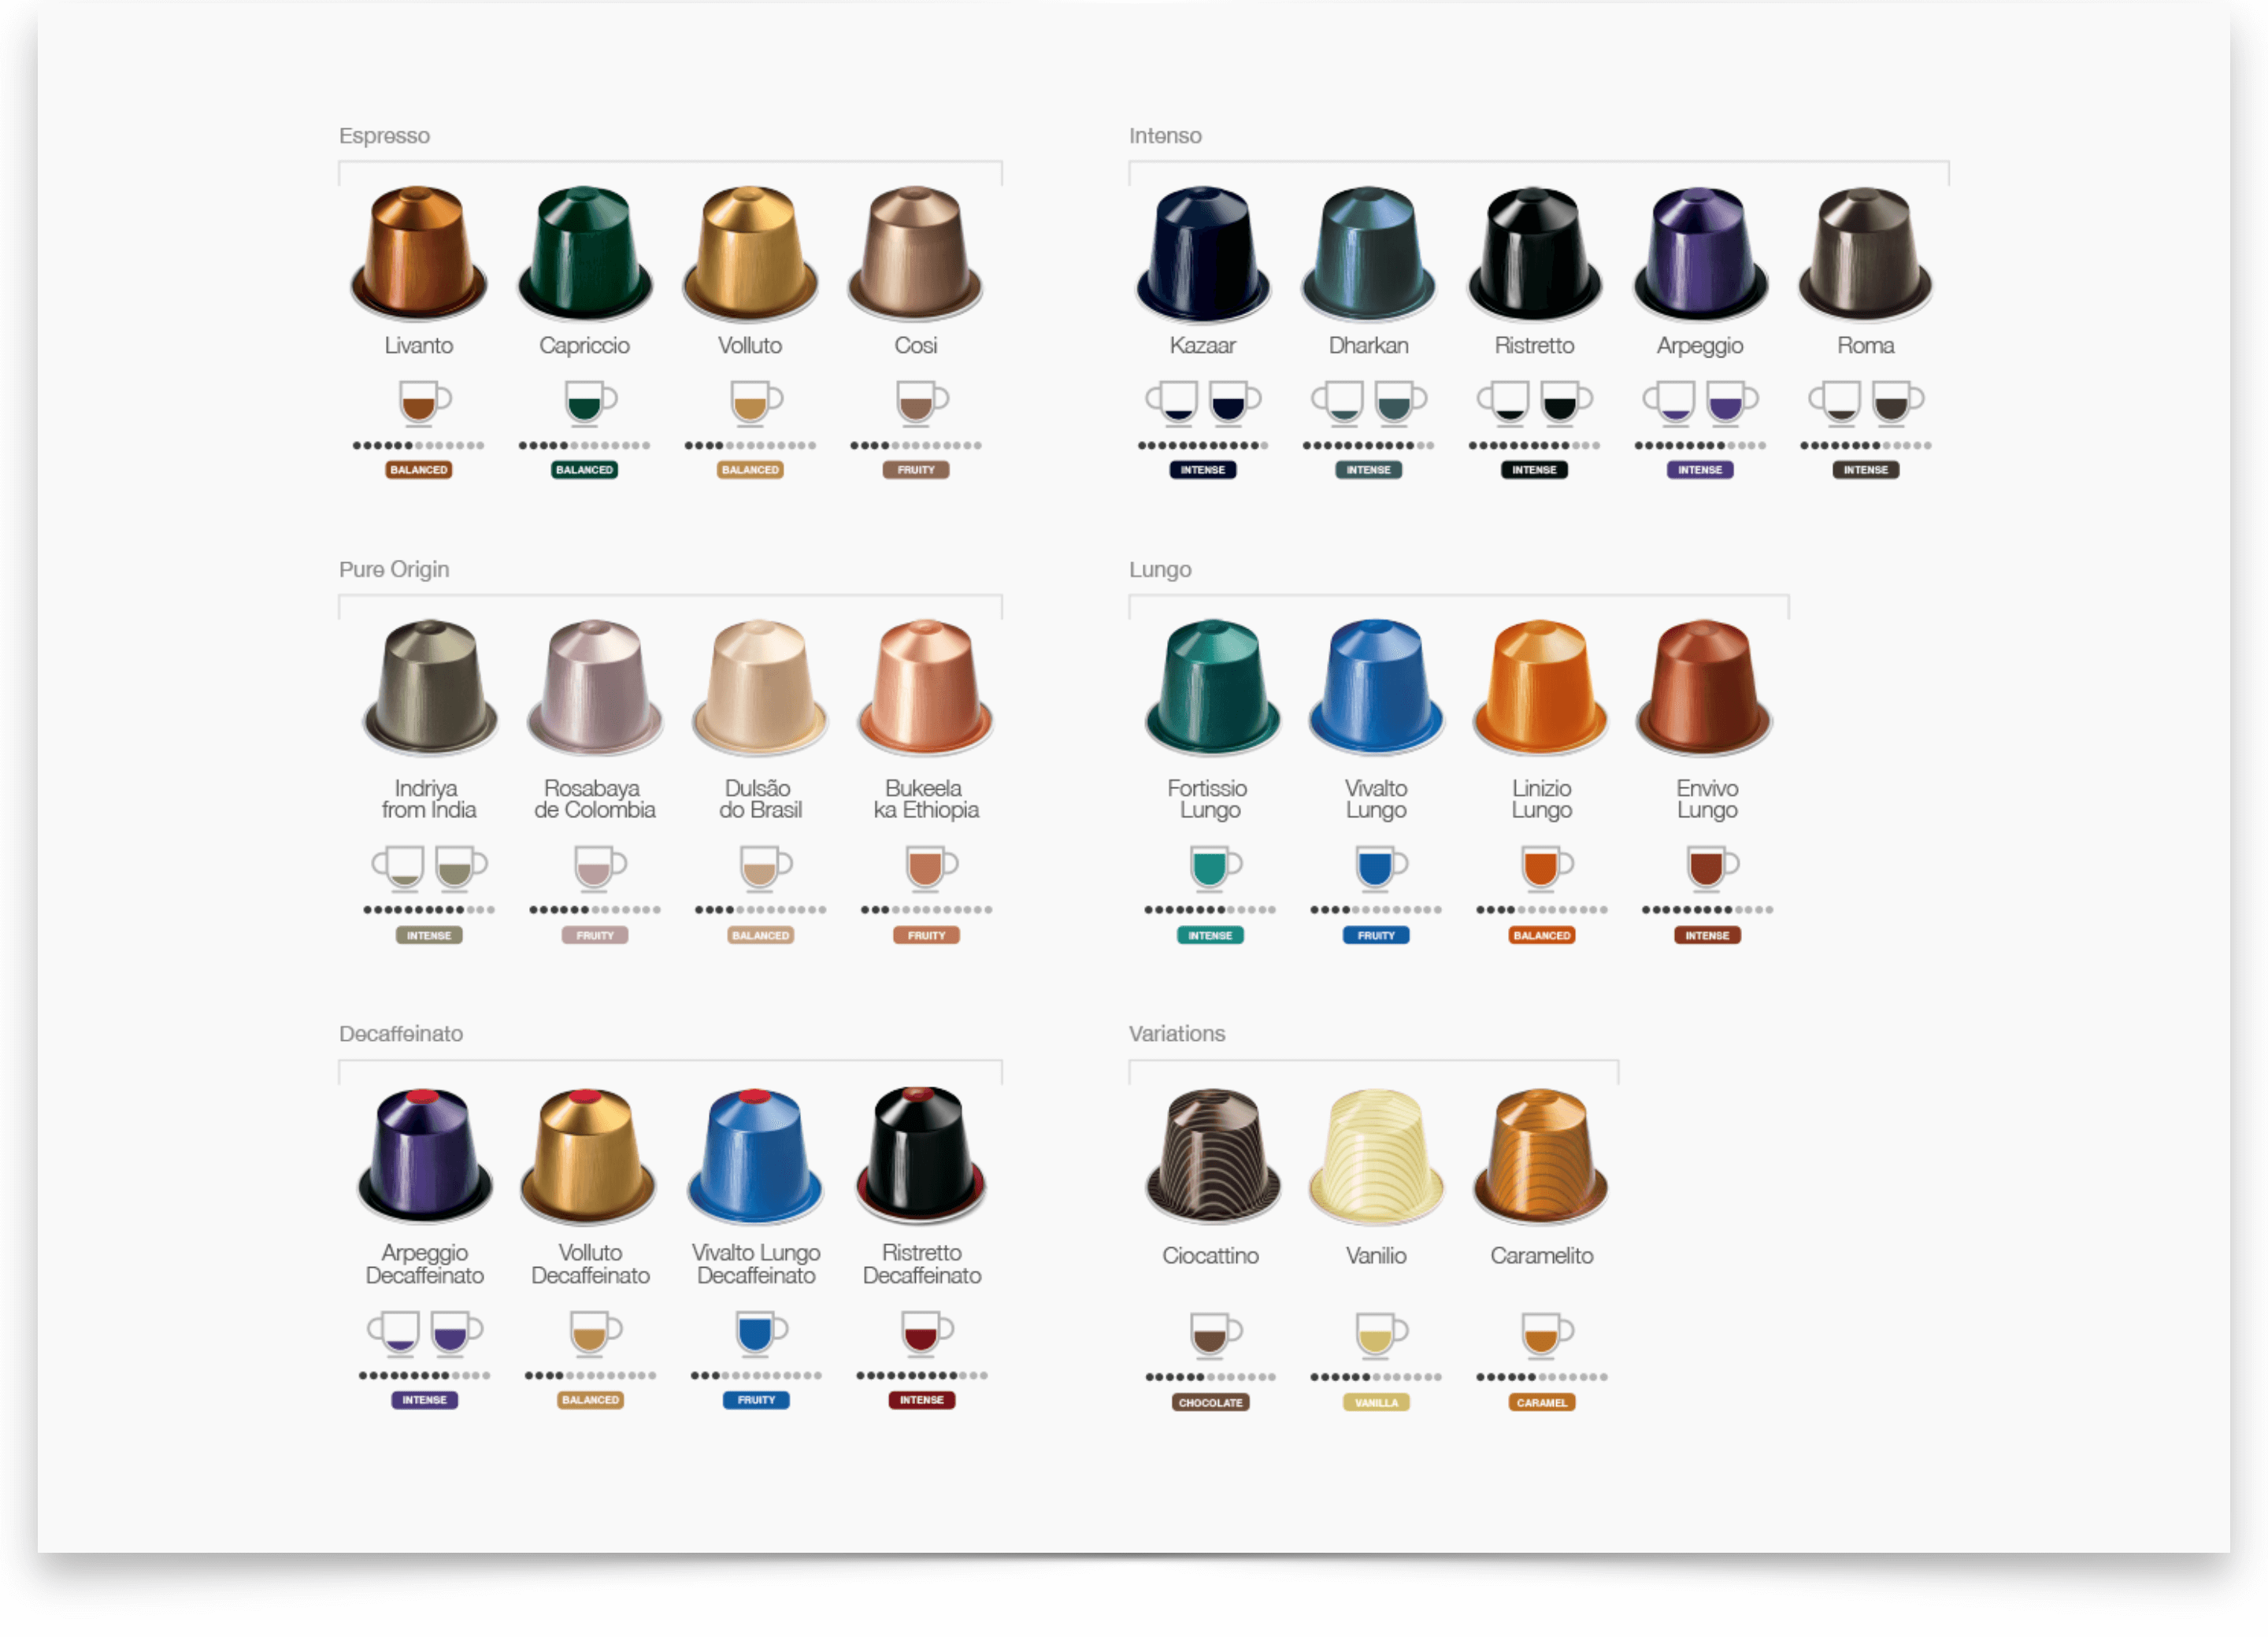 Nespresso® Wall Chart v.3. The third revision of my print friendly